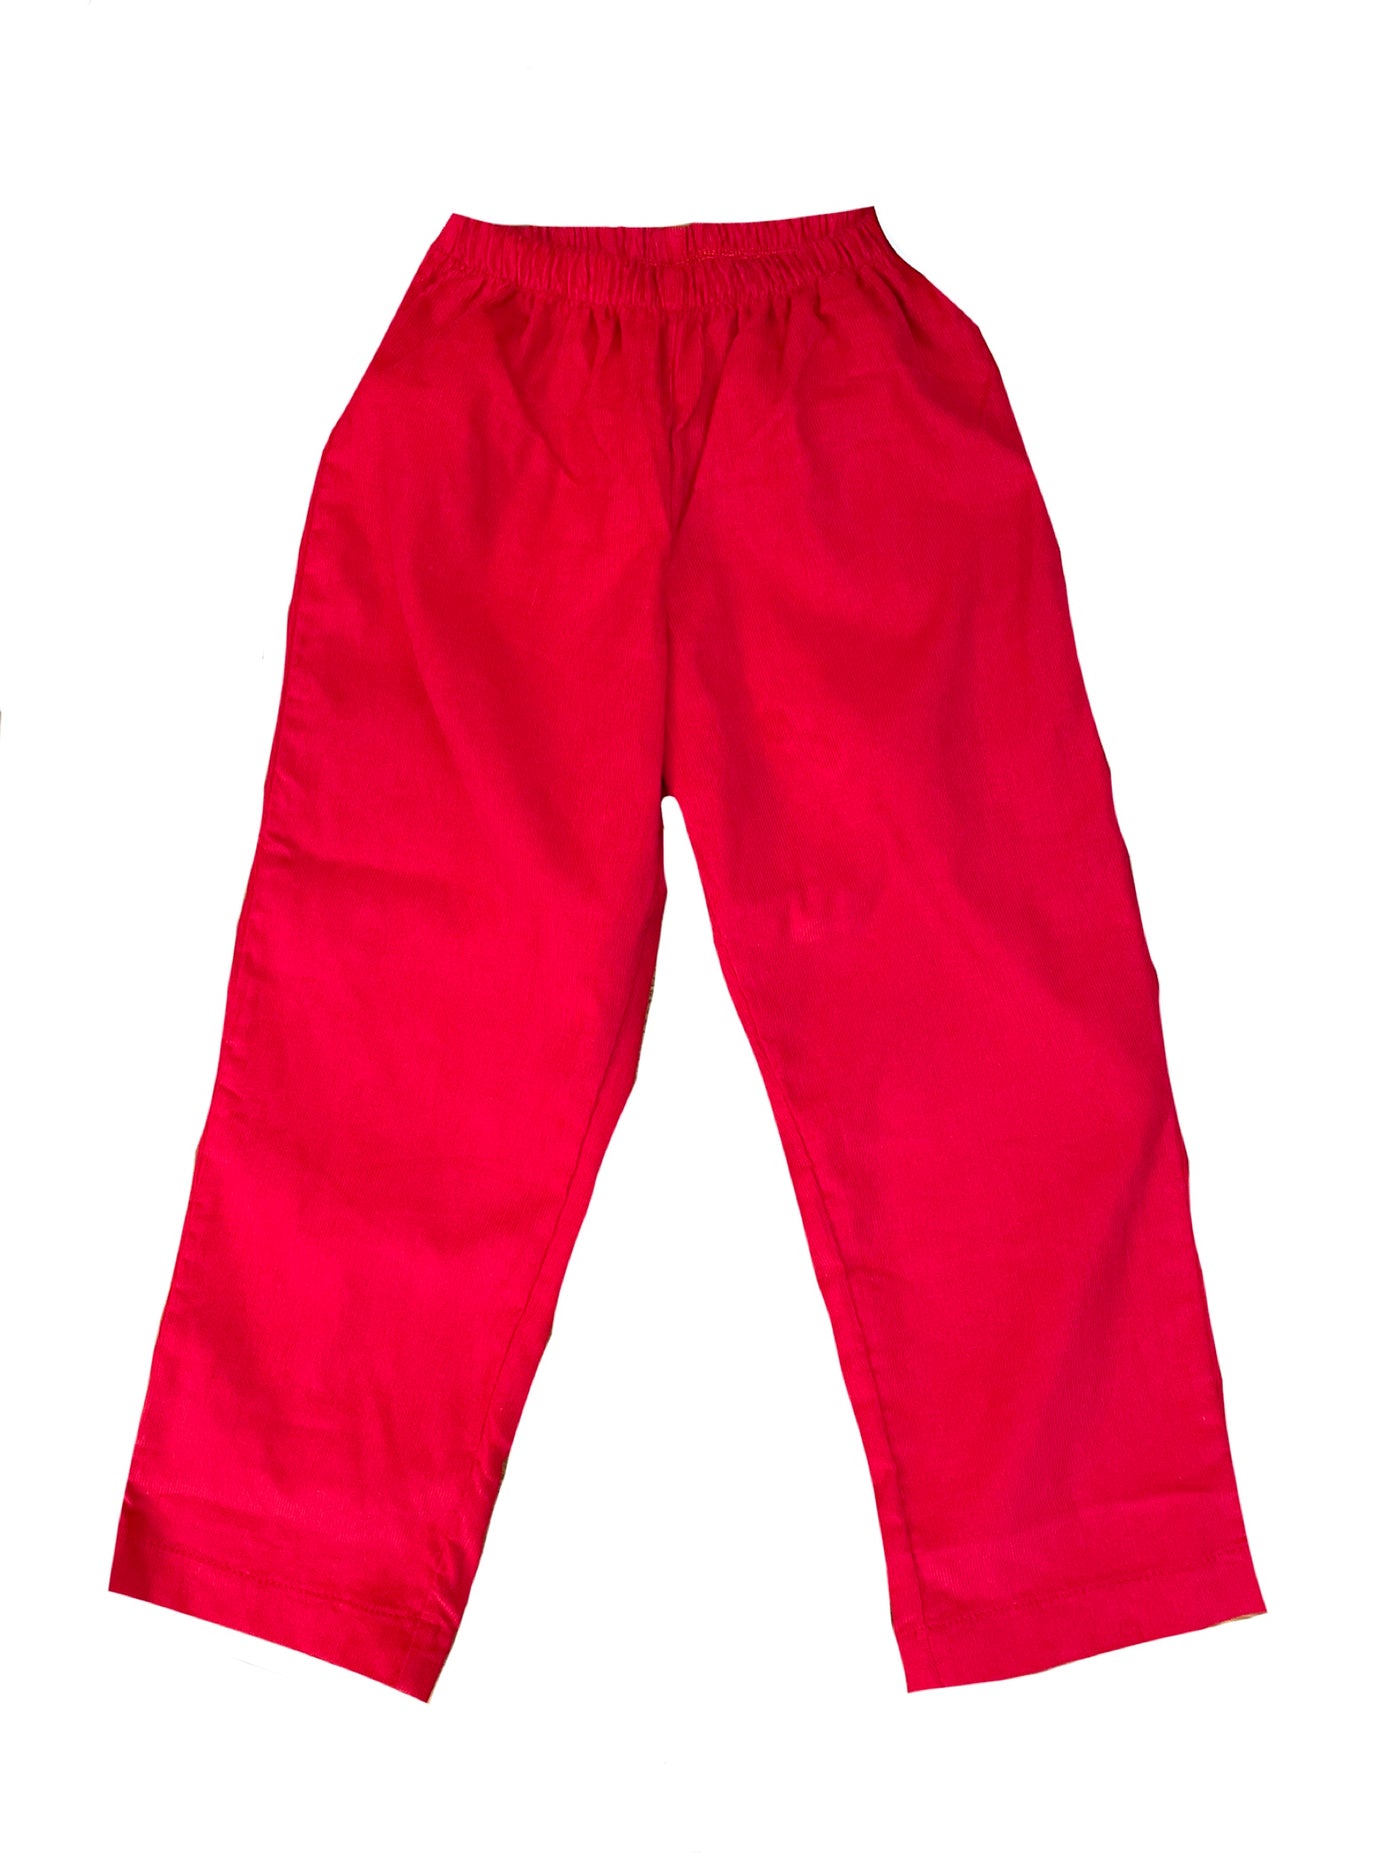 Corduroy Pull on Pants (Available in pink and red)